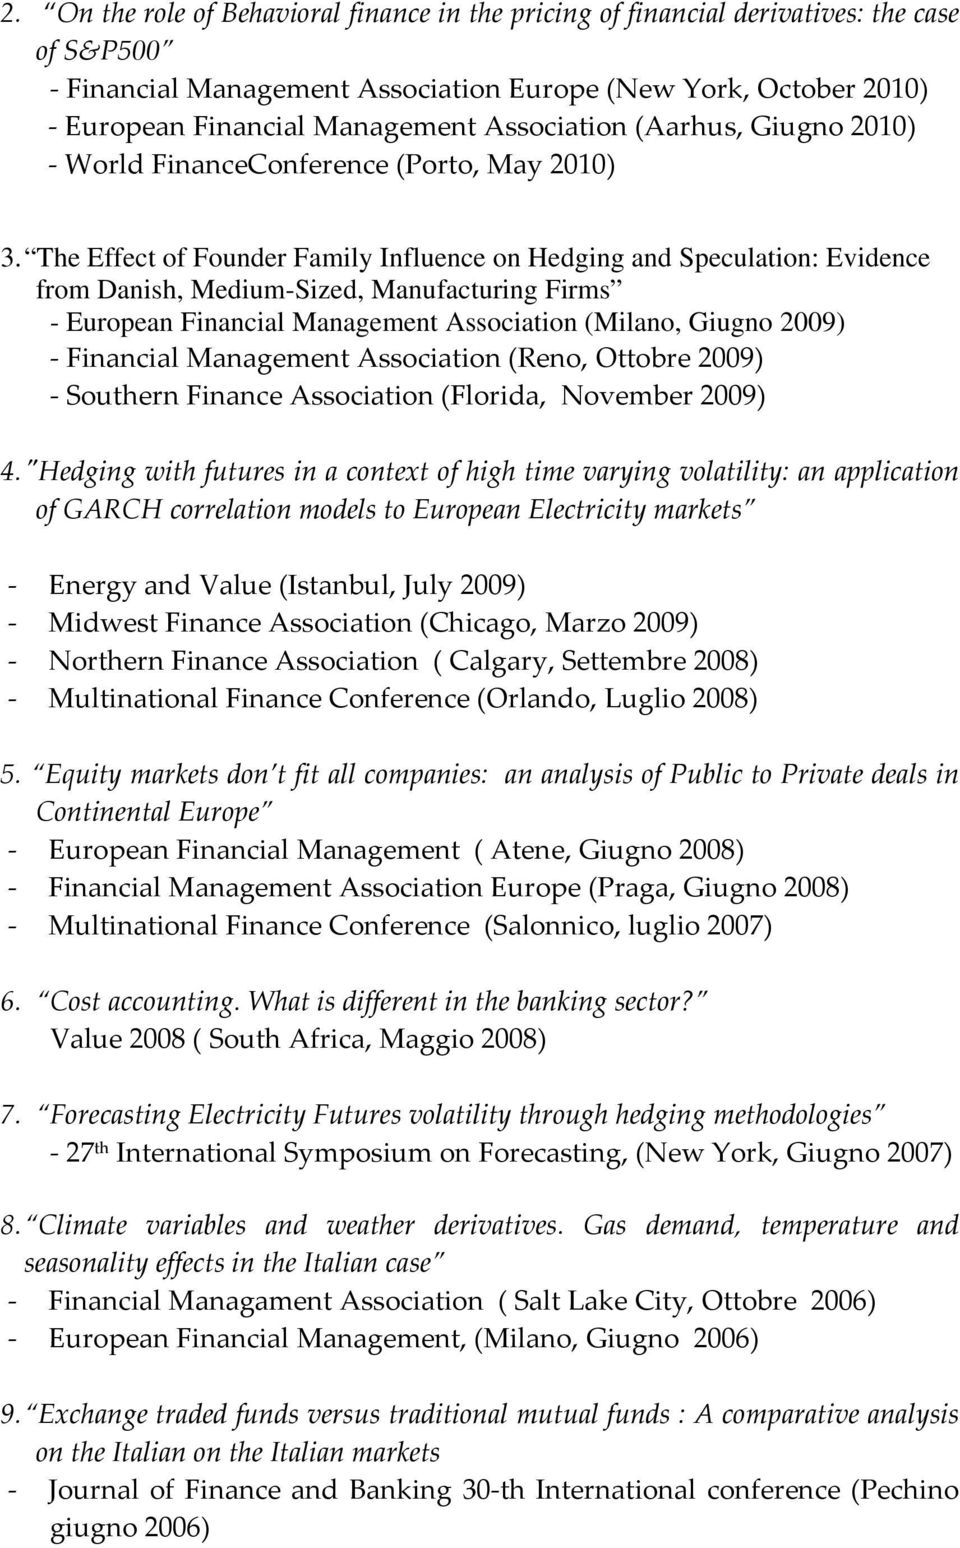 The Effect of Founder Family Influence on Hedging and Speculation: Evidence from Danish, Medium-Sized, Manufacturing Firms - European Financial Management Association (Milano, Giugno 2009) Financial